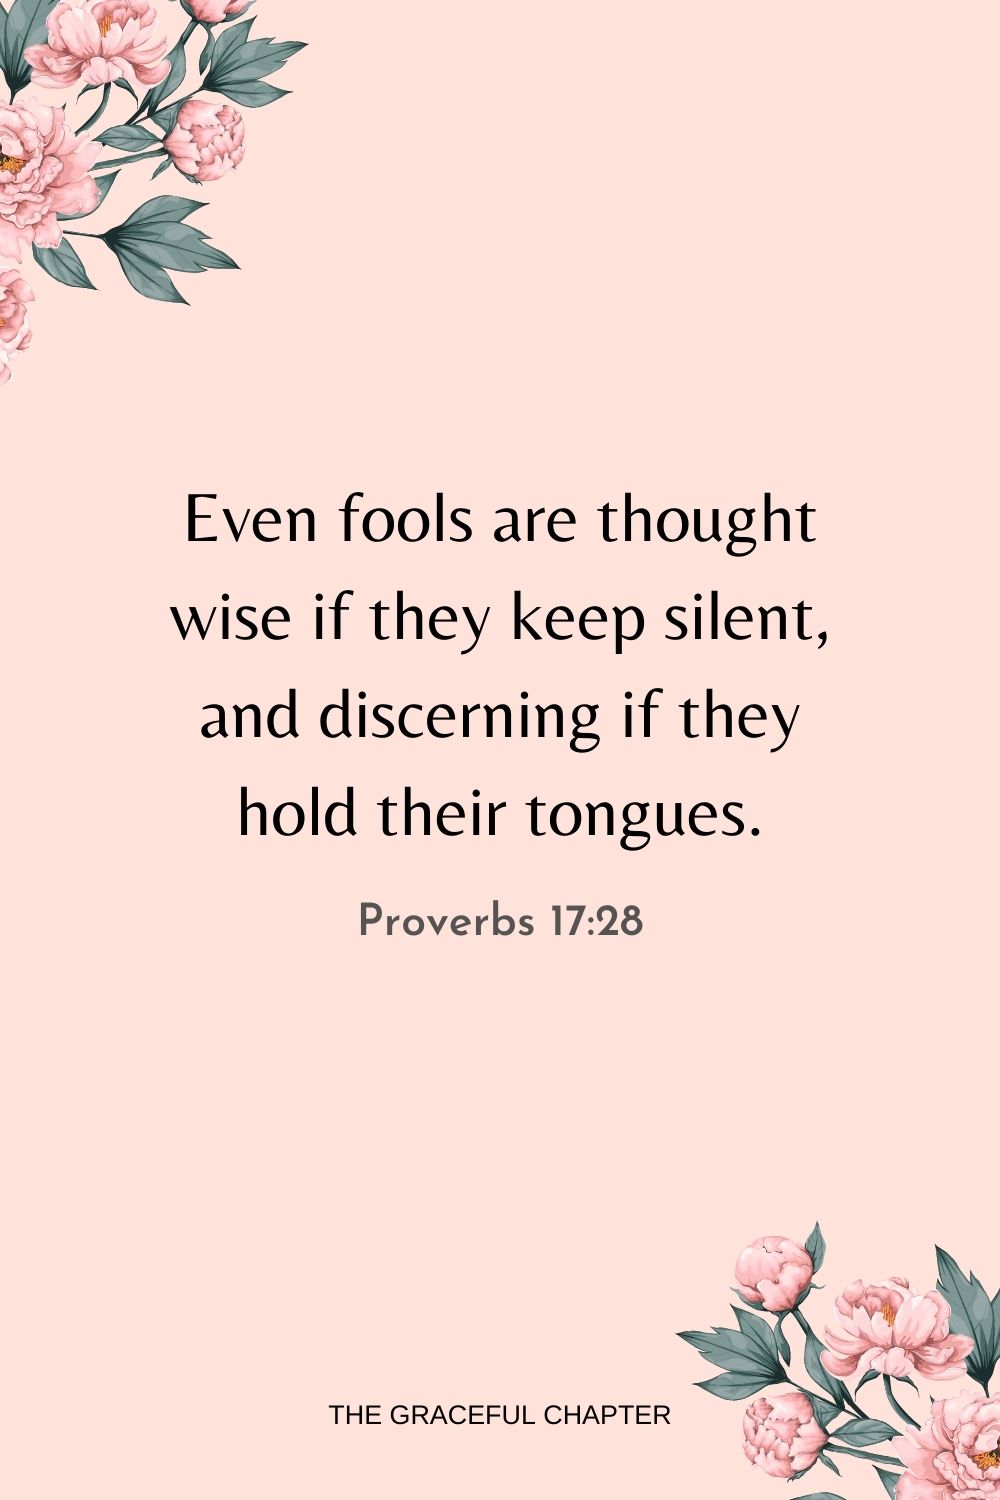 Even fools are thought wise if they keep silent, and discerning if they hold their tongues. Proverbs 17:28